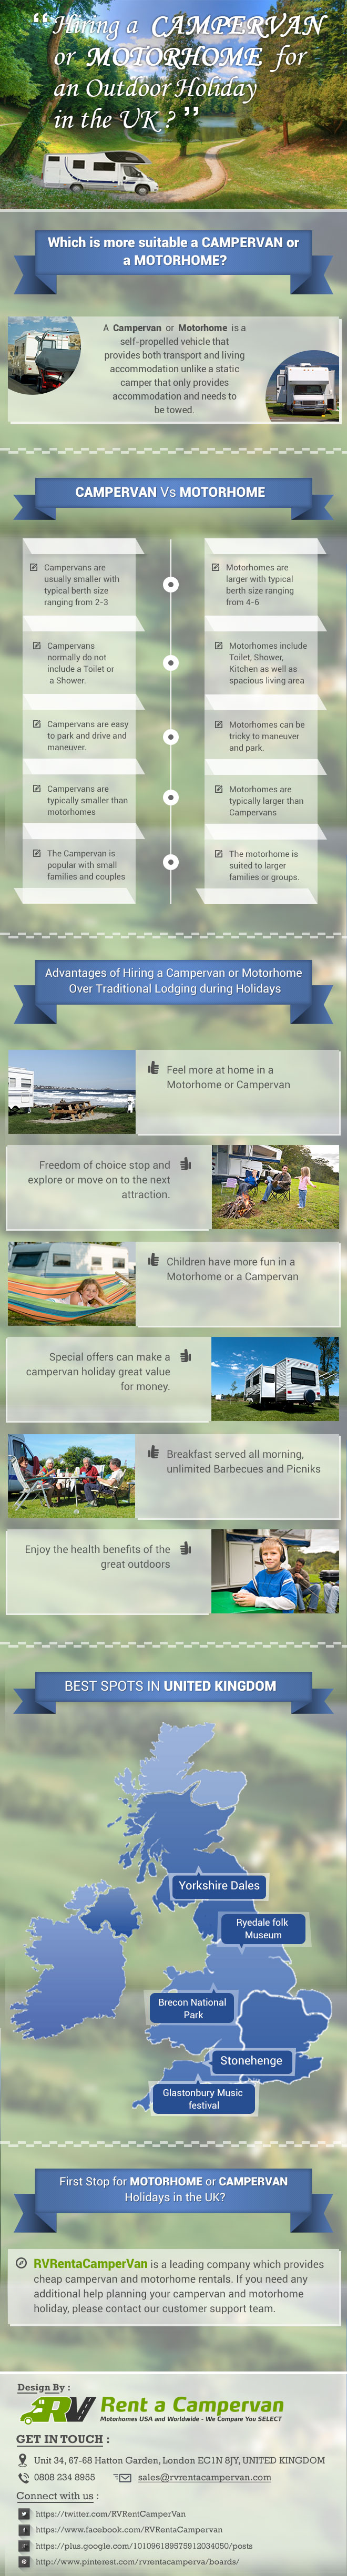 whats-the-difference-between-a-motorhome-and-a-campervan_5260ccee86735